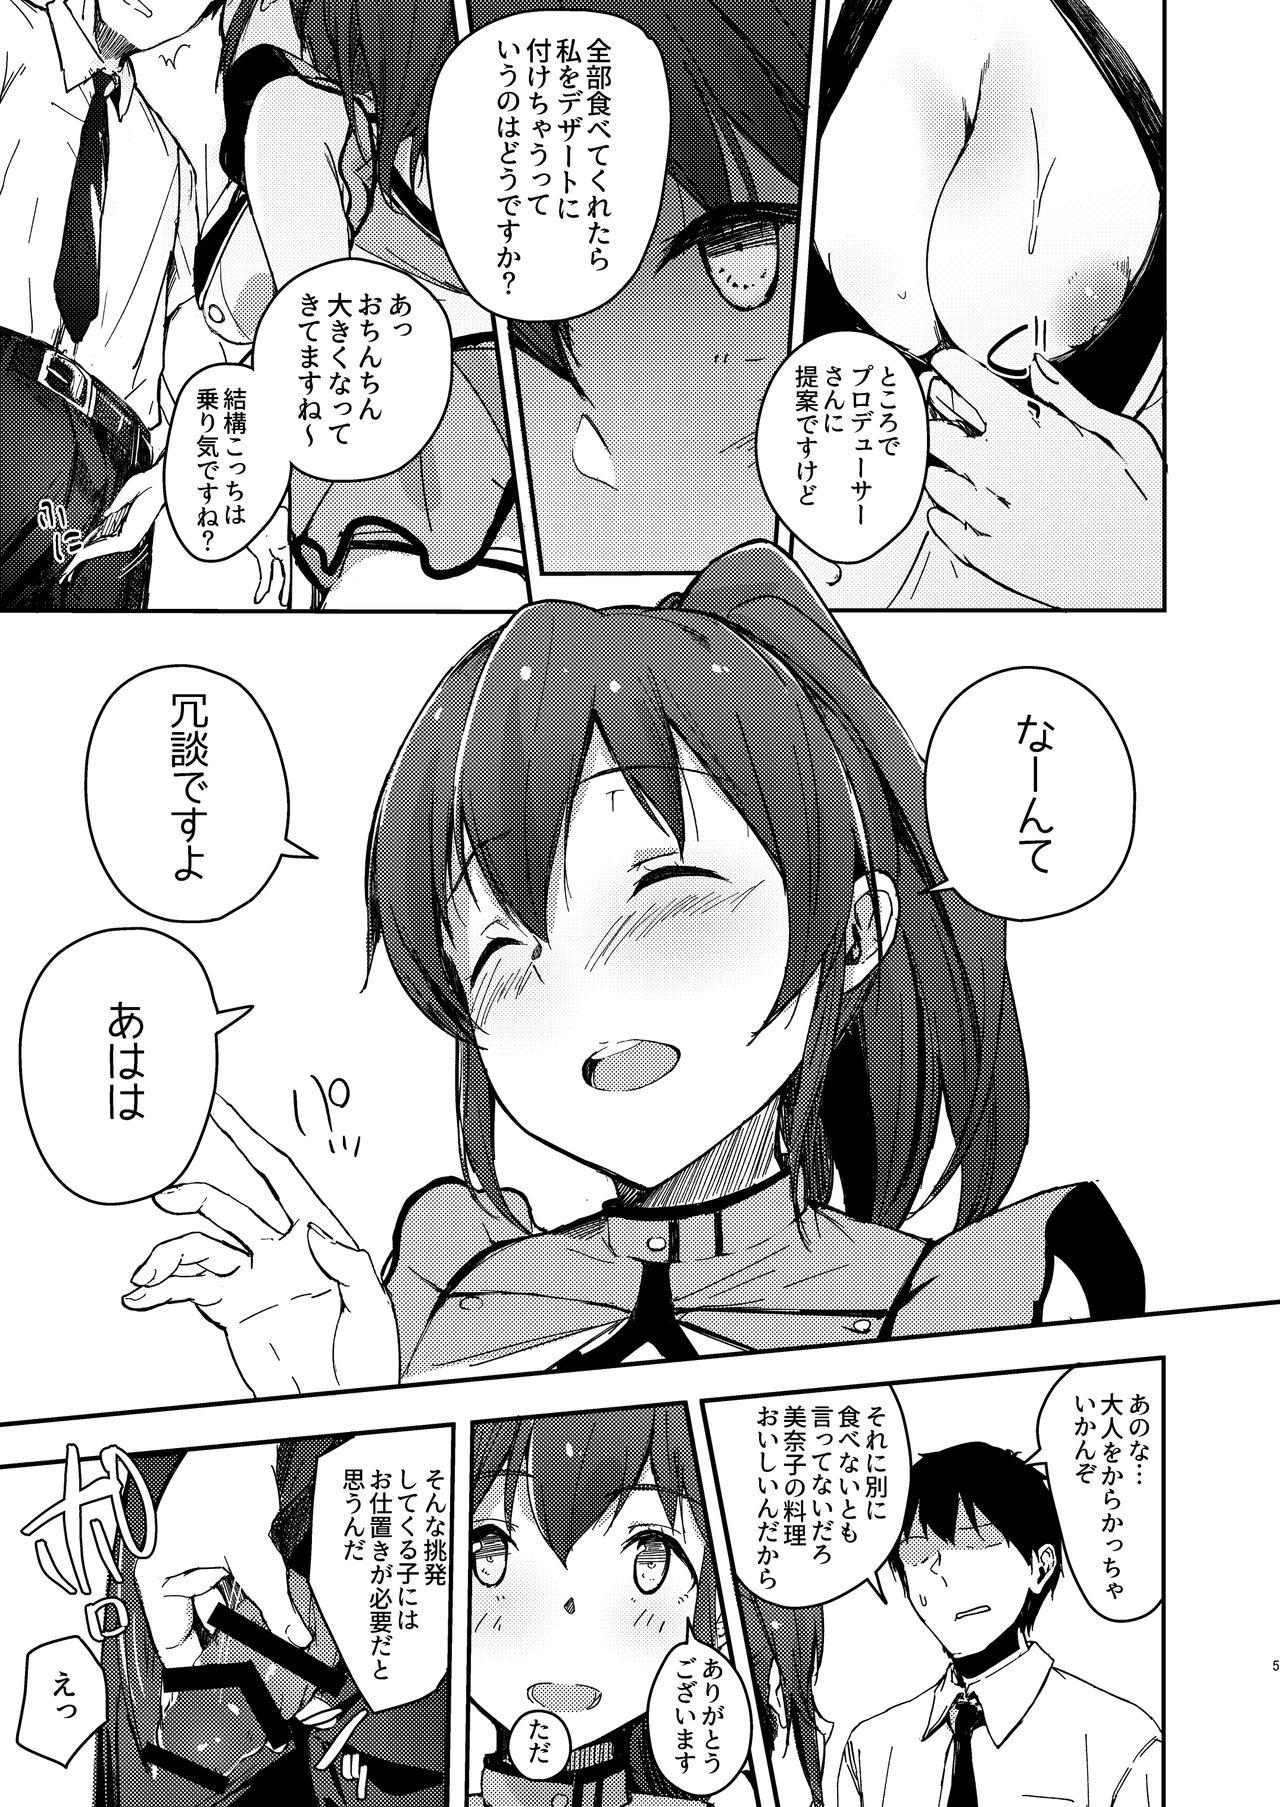 Kiss TOP! CLOVER BOOK + omake - The idolmaster Assfuck - Page 4